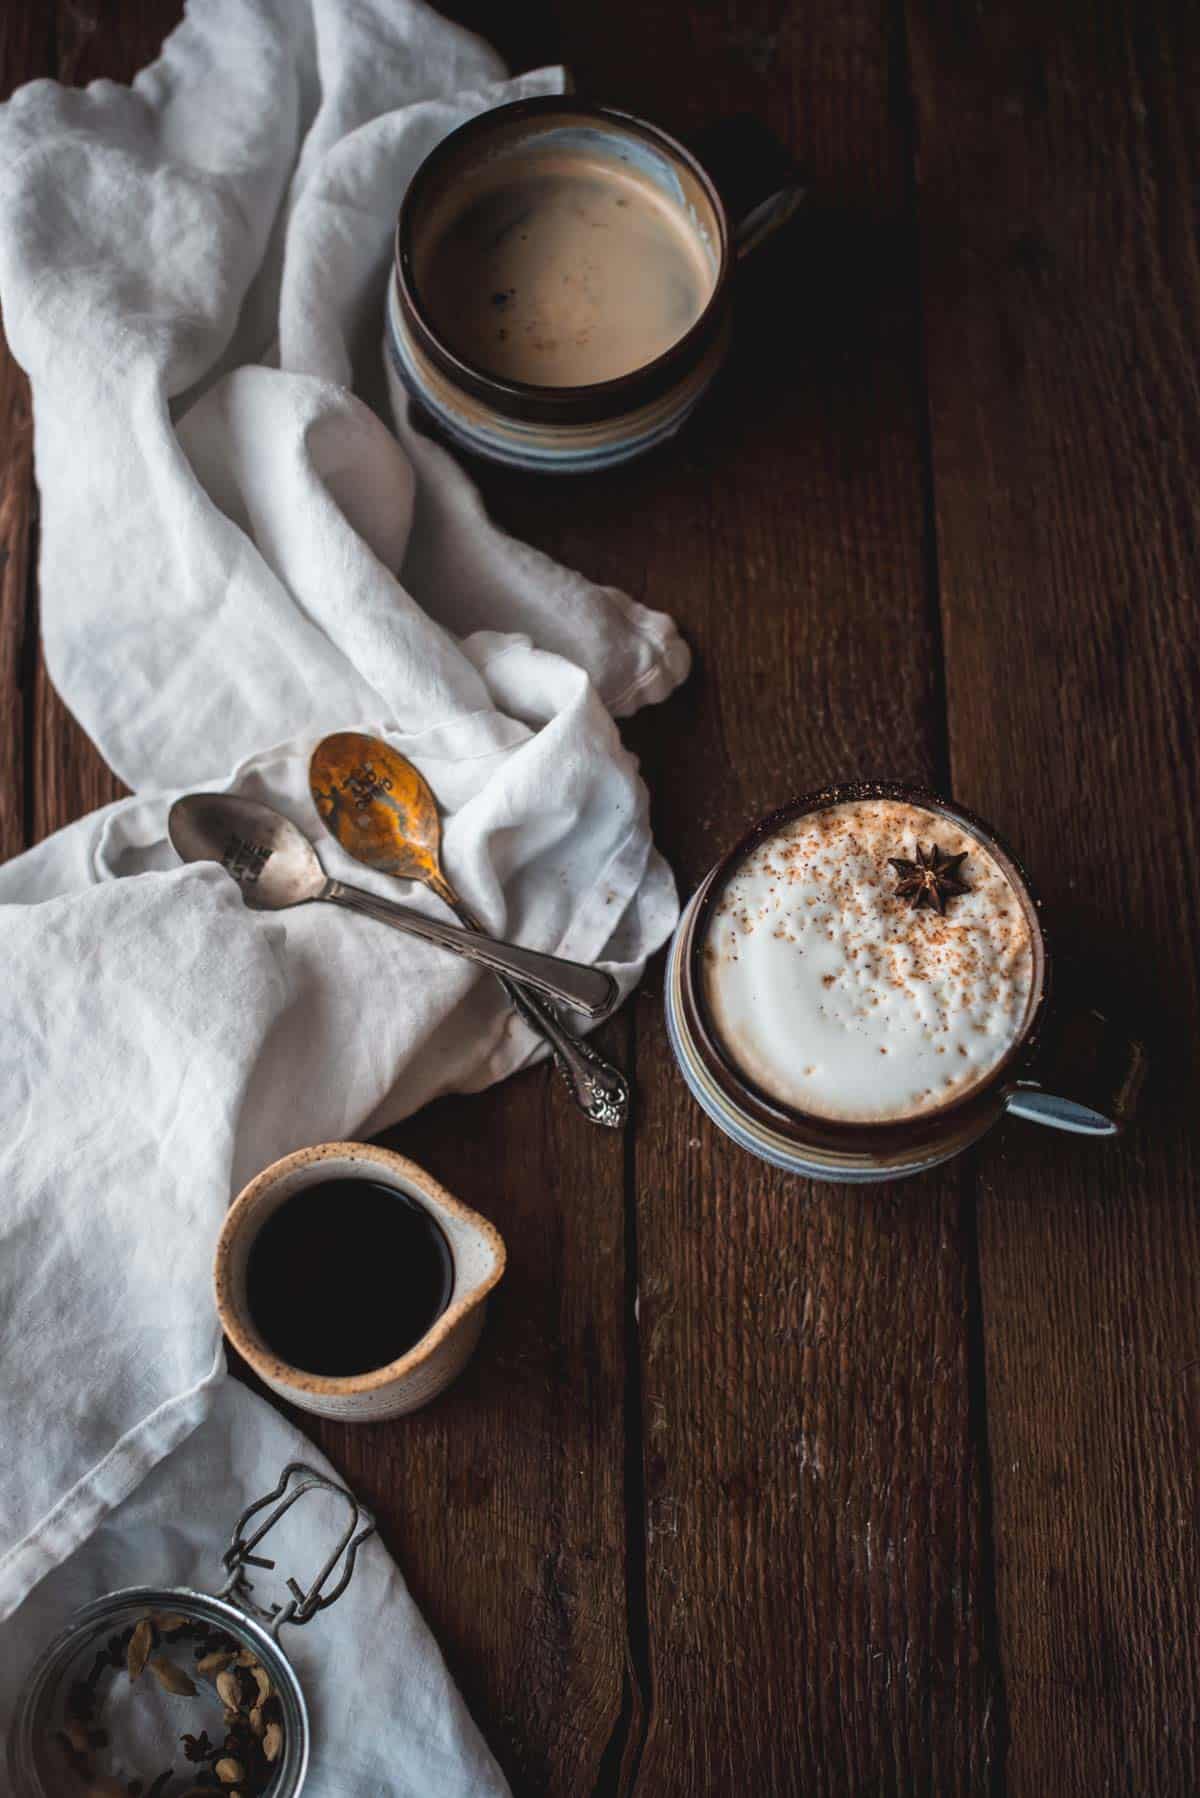 Close up overhead image of a latte in one mug and another much with chai latte and espresso but no additional milk.  The mugs are next to antique spoons on a linen napkin and a carafe filled with chai latte.  There is also a jar with chai spices.